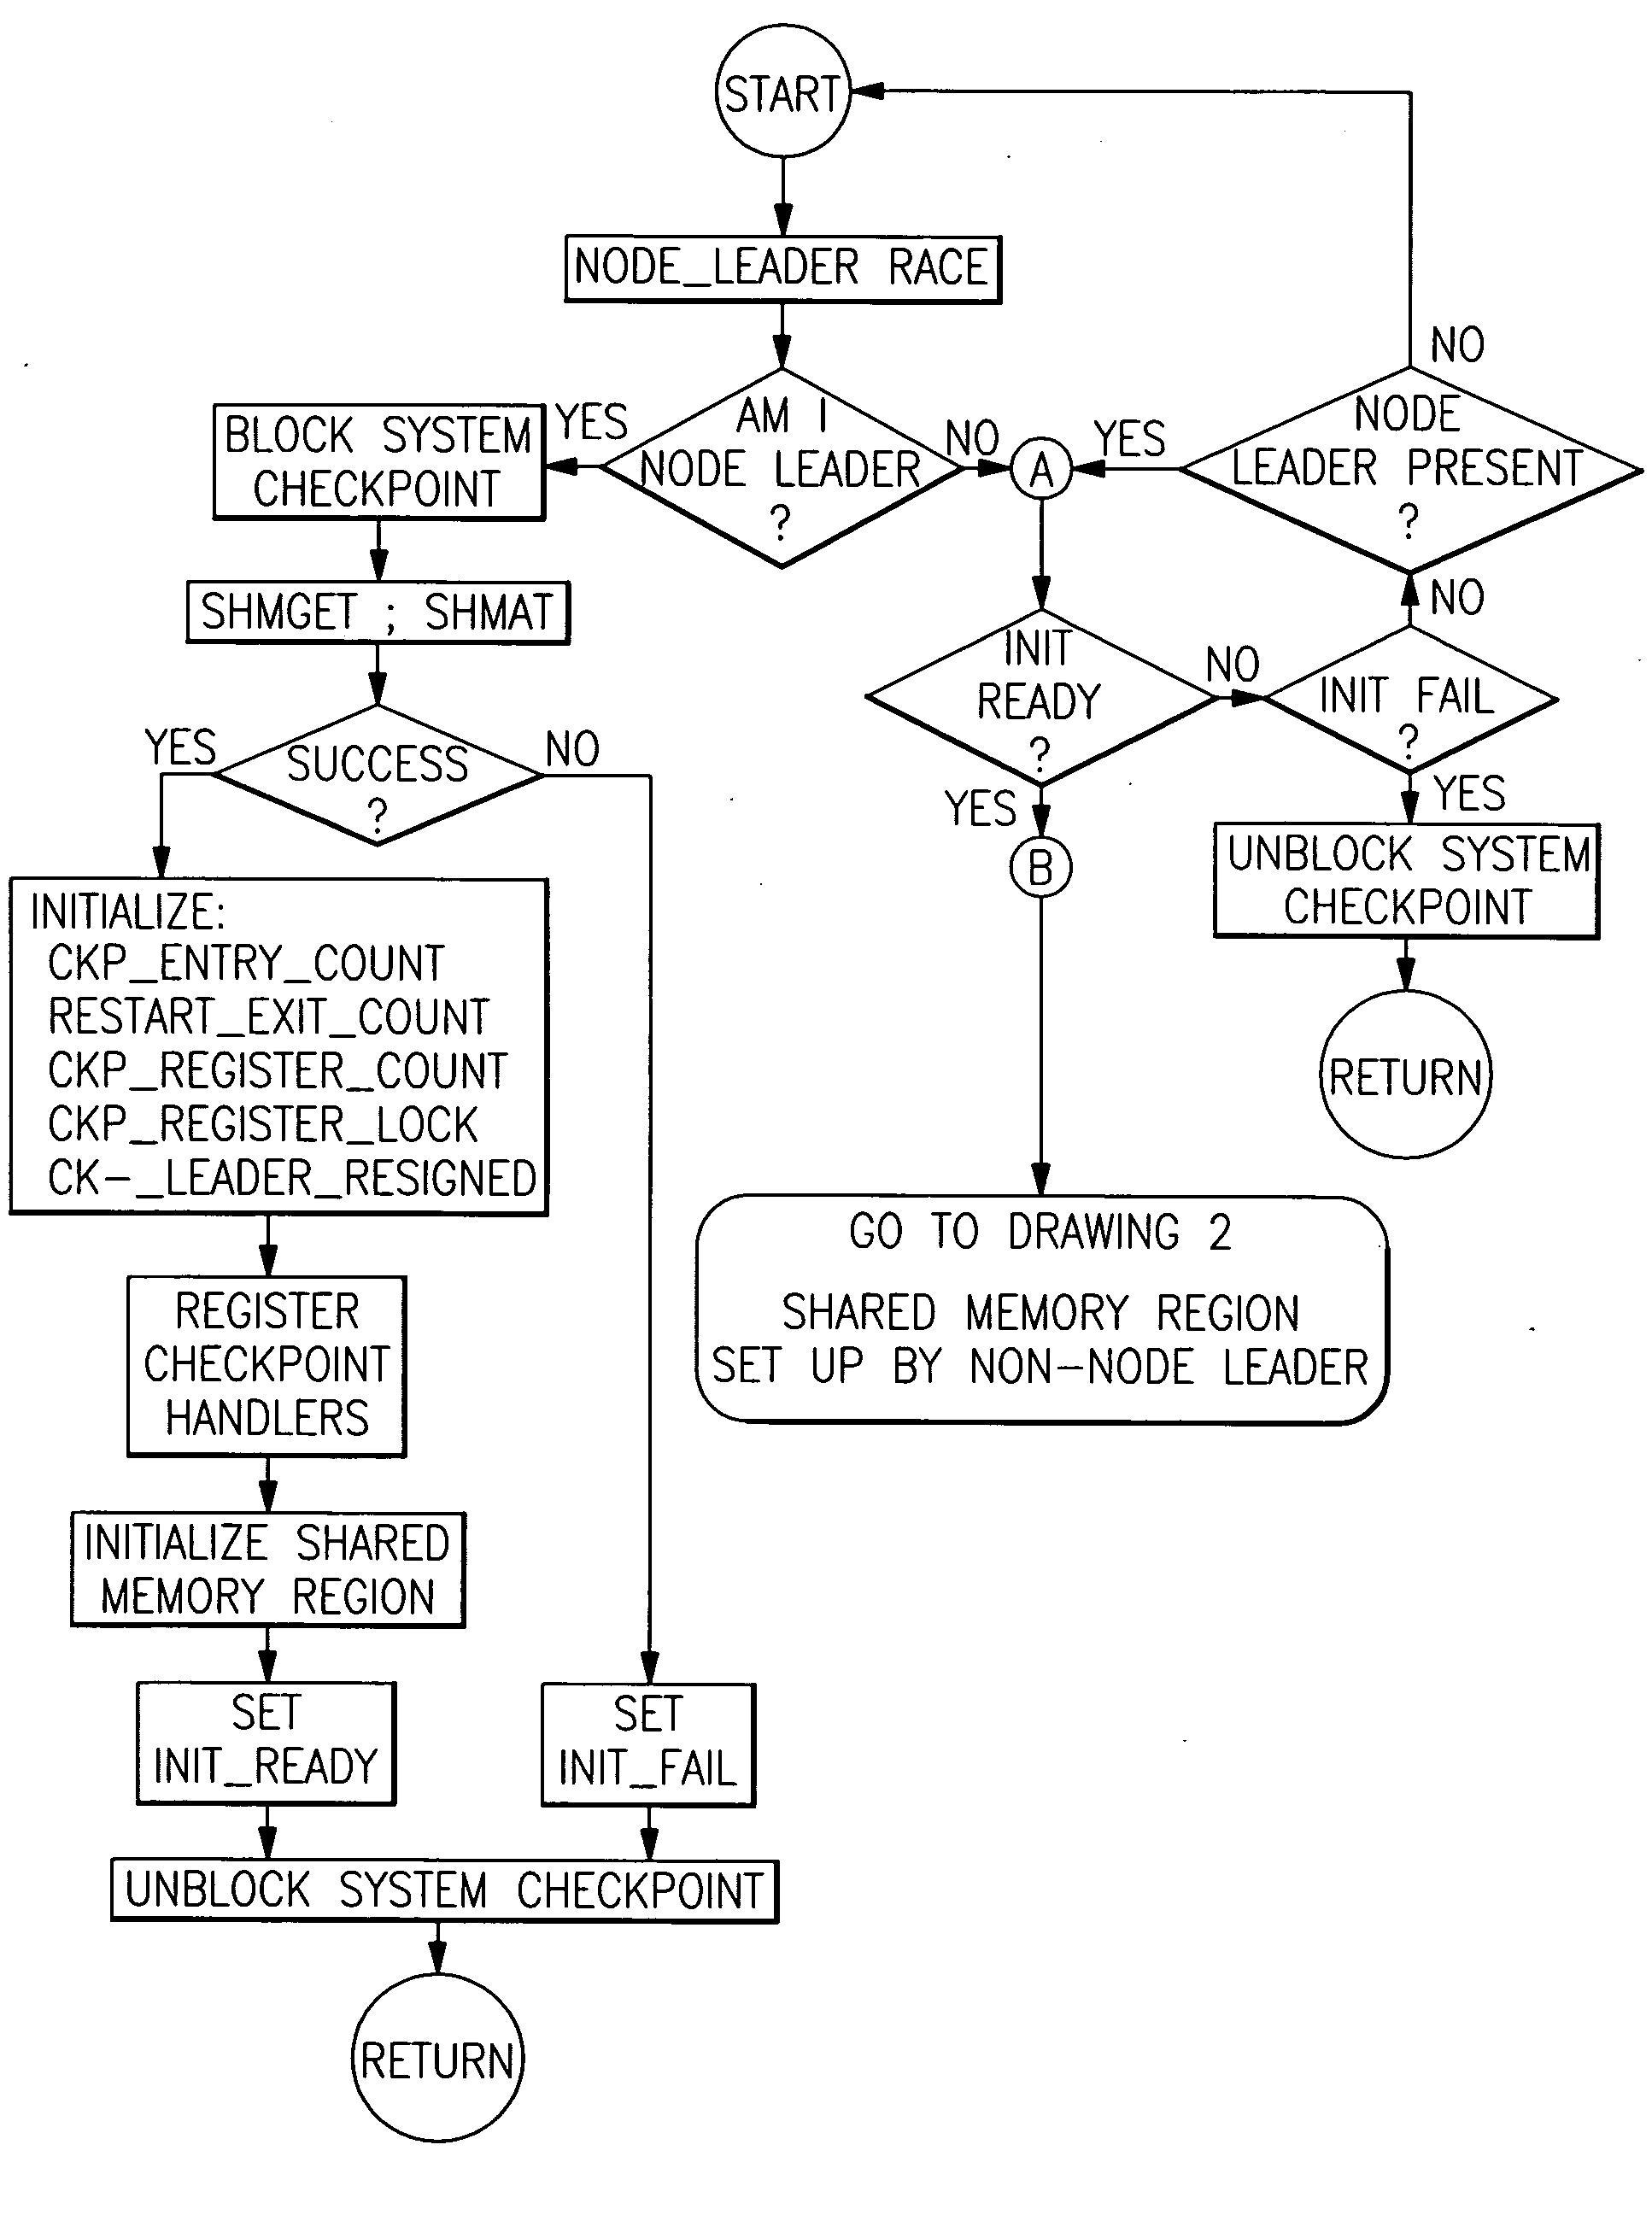 Checkpoint/resume/restart safe methods in a data processing system to establish, to restore and to release shared memory regions